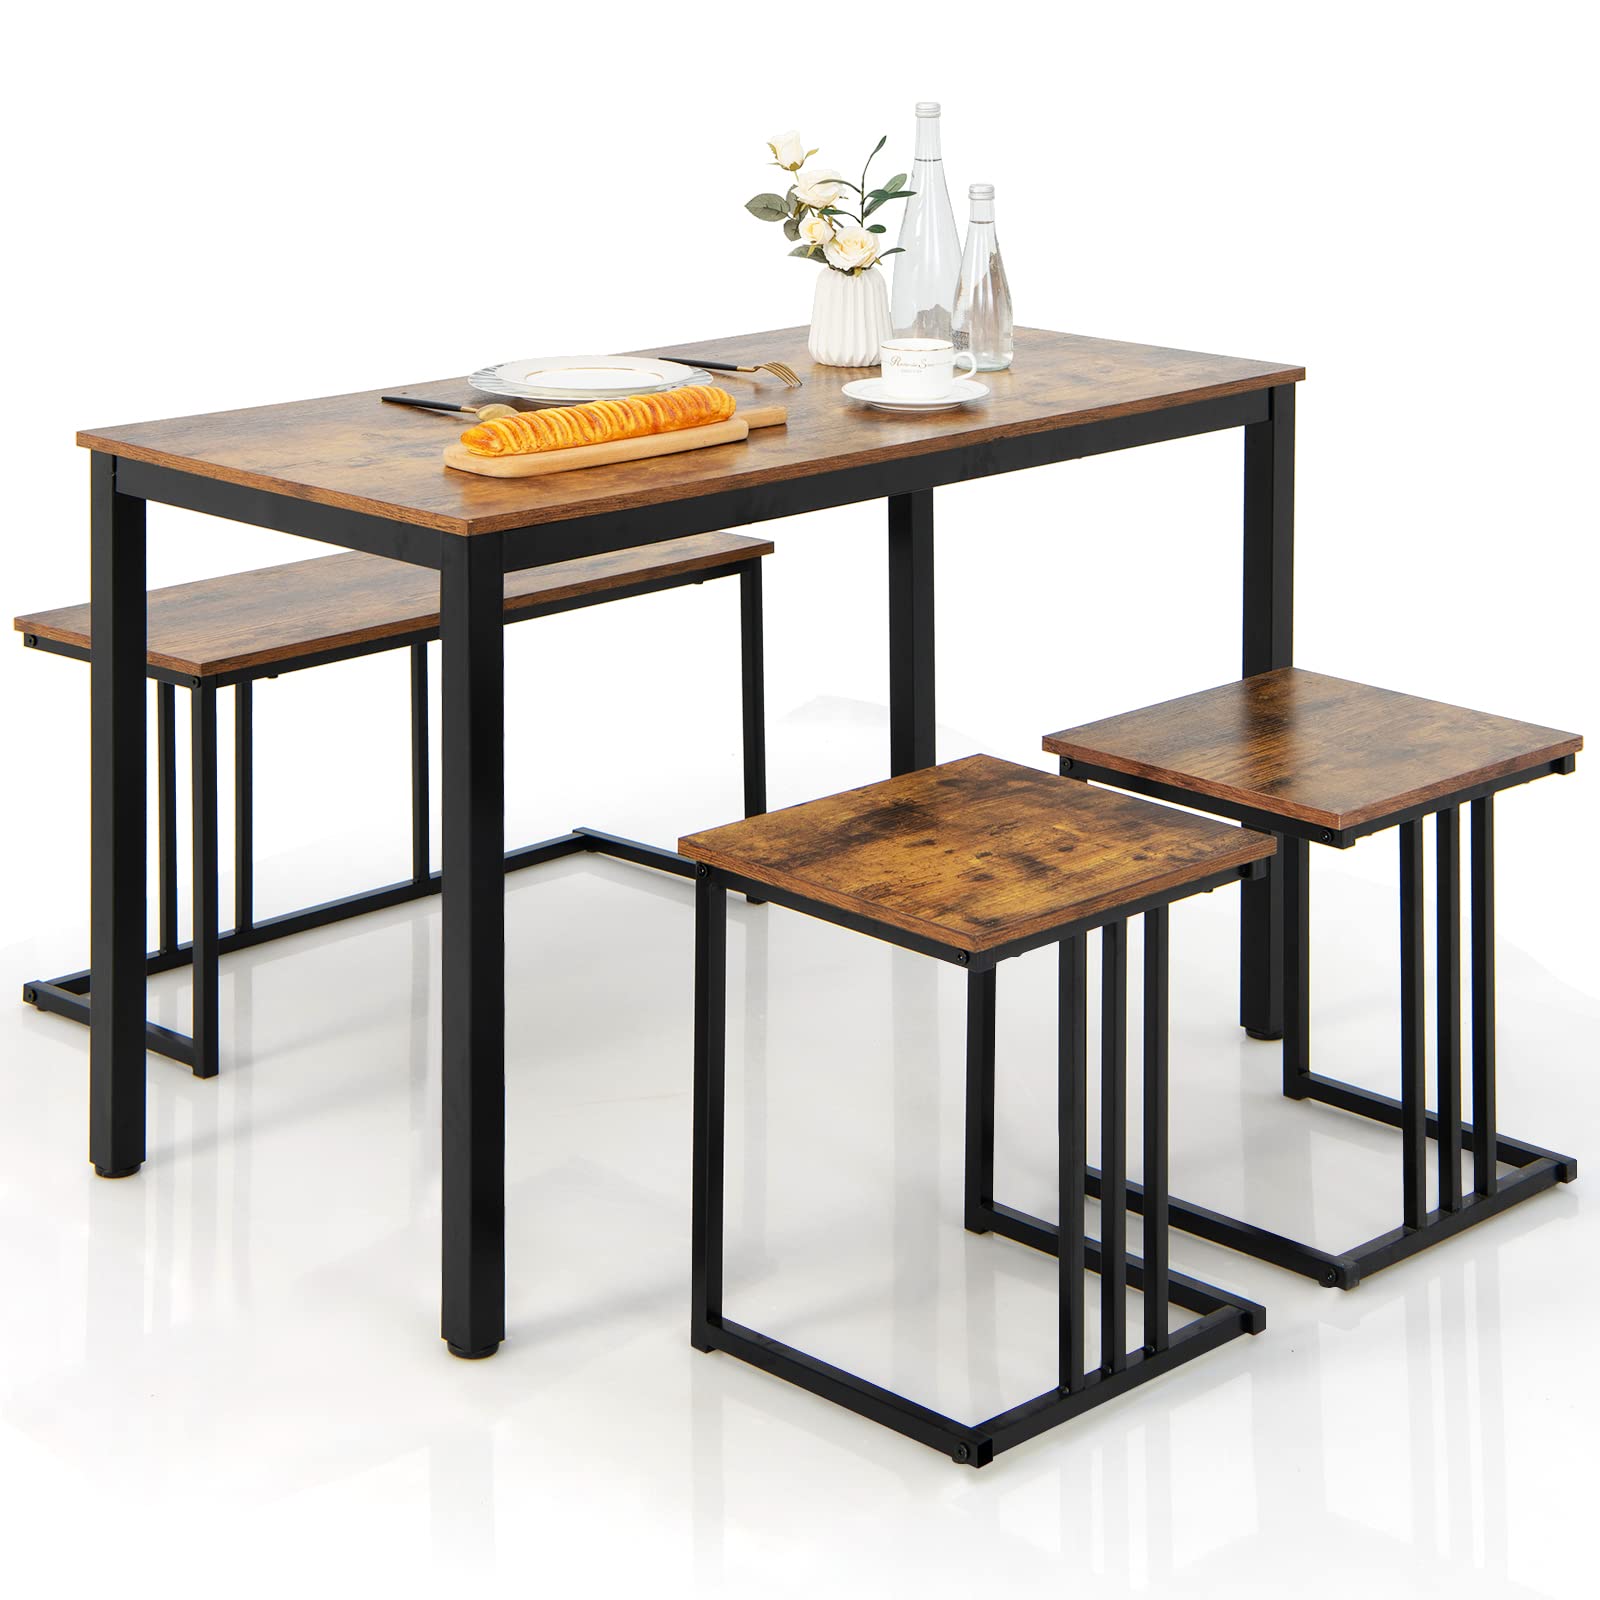 Dining Table Set for 4 - Giantex